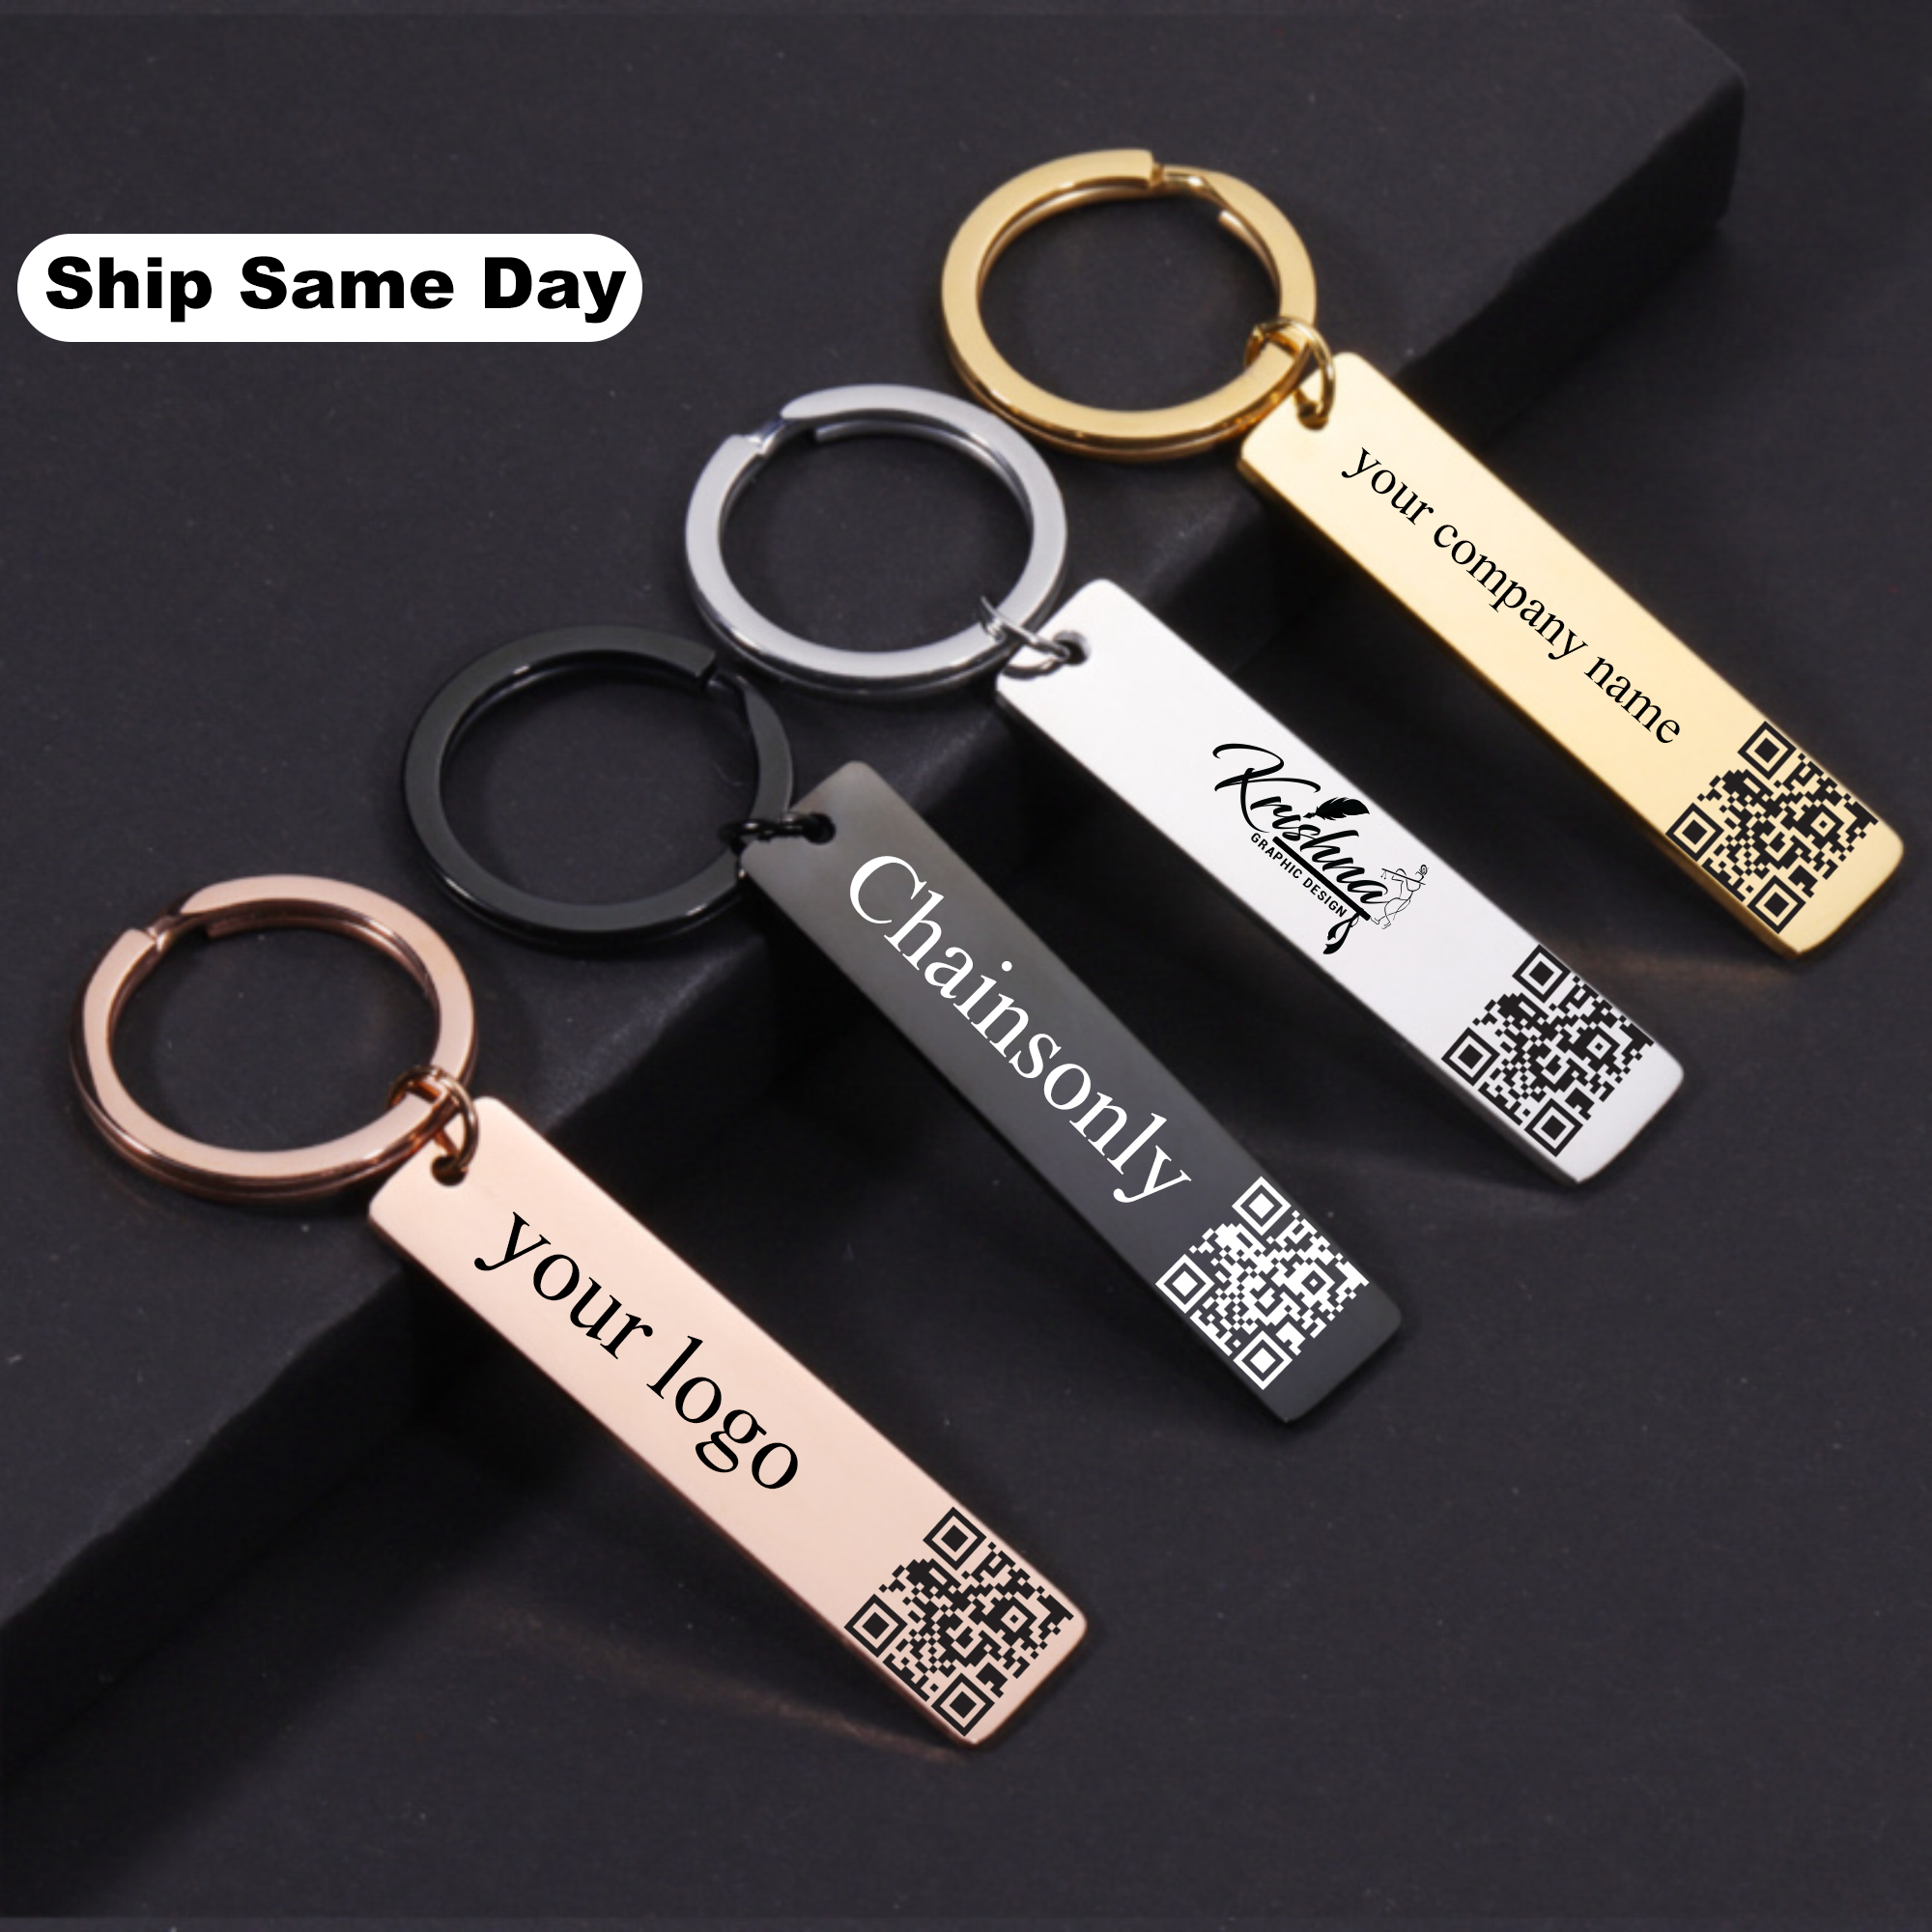 Business All Socical Media Keychain KCK 4 C